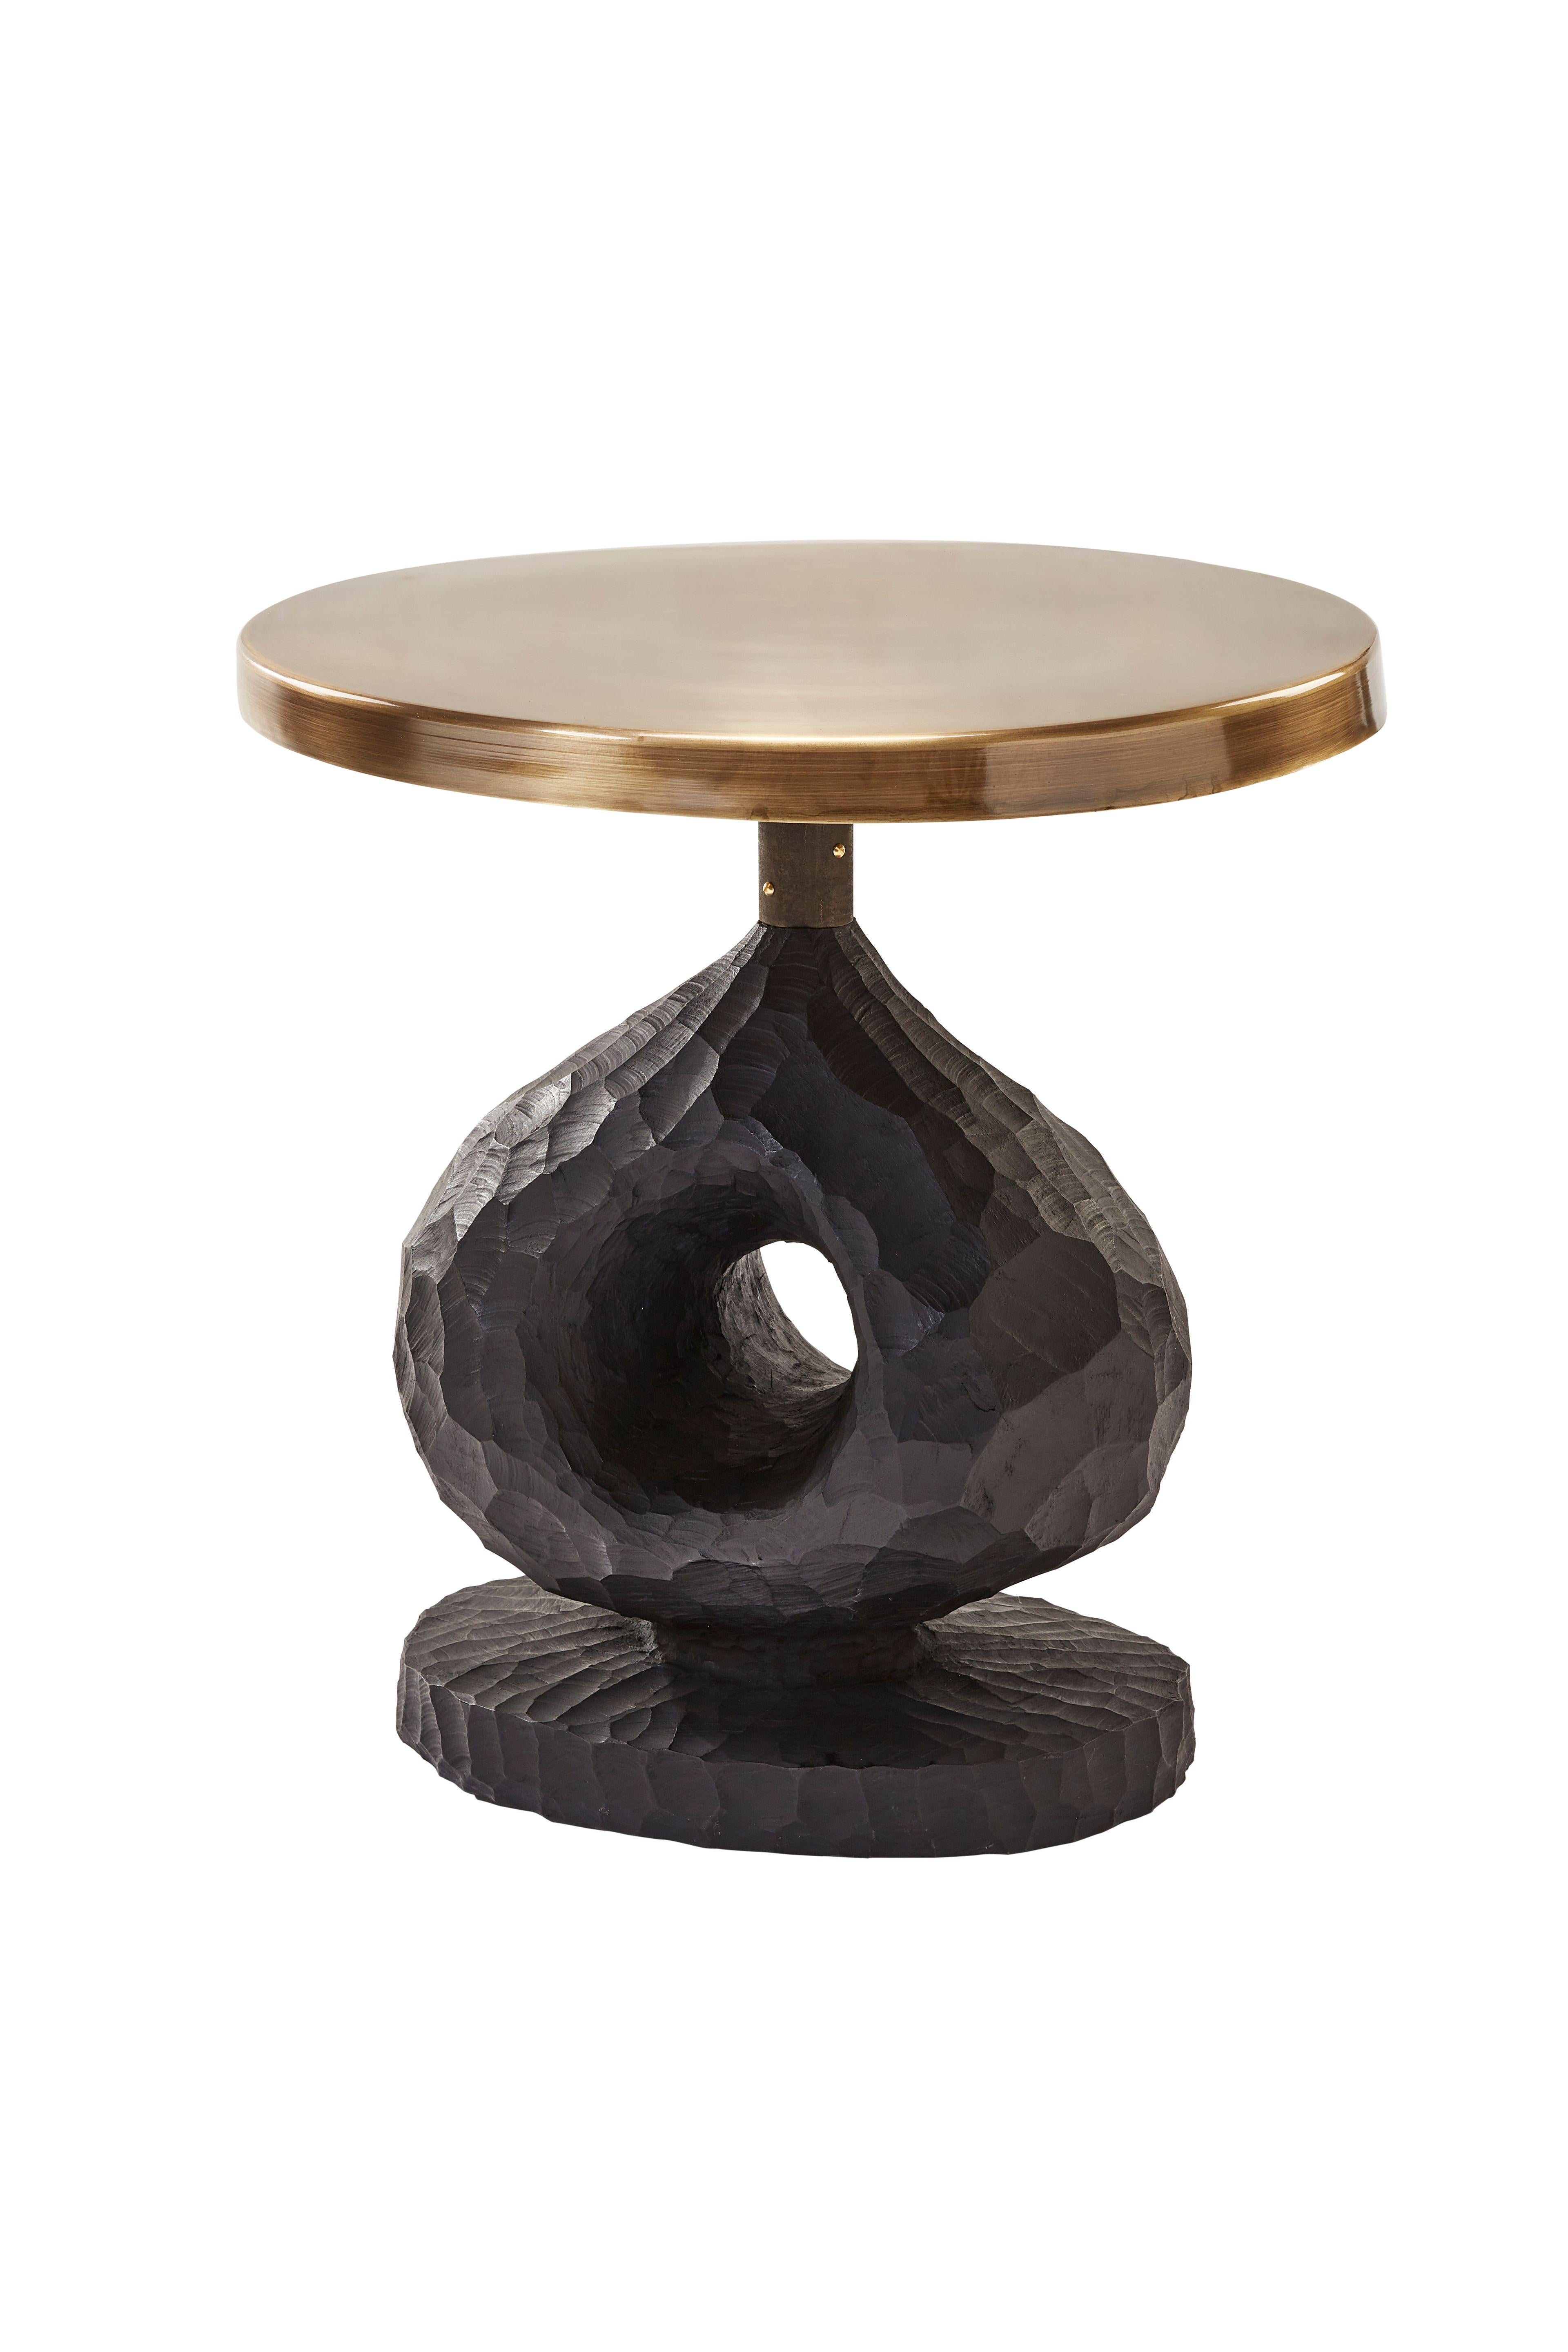 Blessing Side Table by Egg Designs
Dimensions: 60 L X 60 D X 65 H cm 
Materials: Chiseled Alien Wood, Bronze Coated Steel

Founded by South Africans and life partners, Greg and Roche Dry - Egg is a unique perspective in contemporary furniture